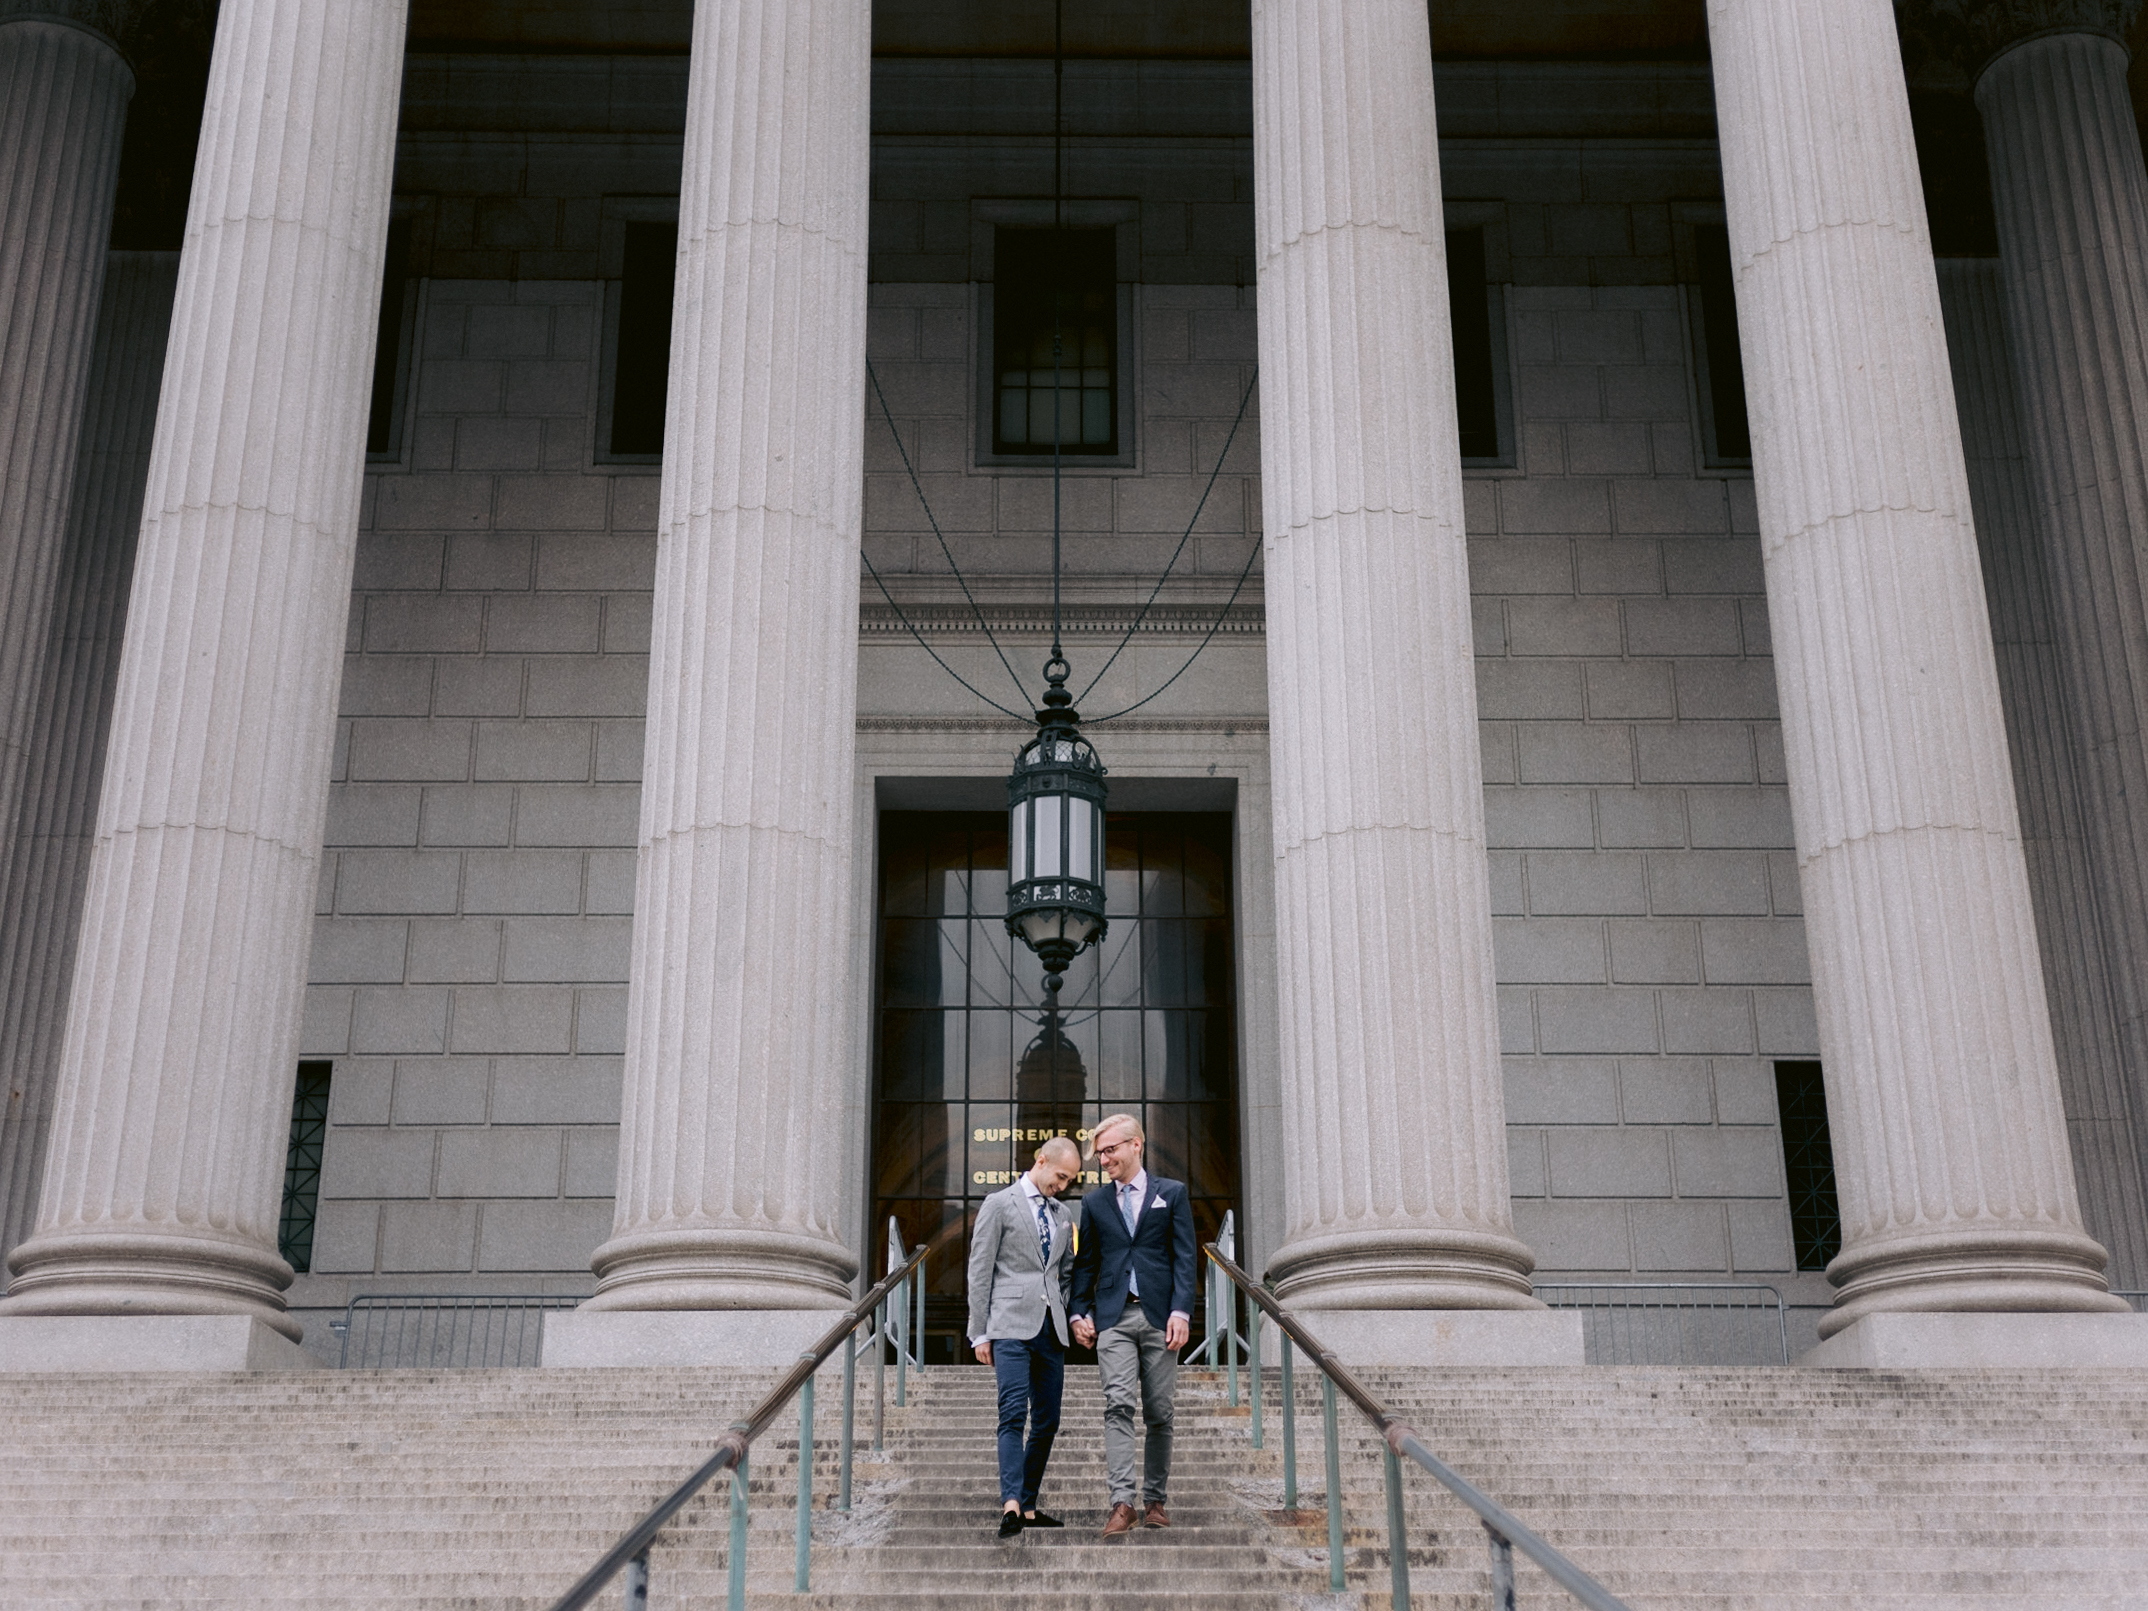 The two grooms are in front of the NYC City Hall for their wedding ceremony. Elopement image by Jenny Fu Studio